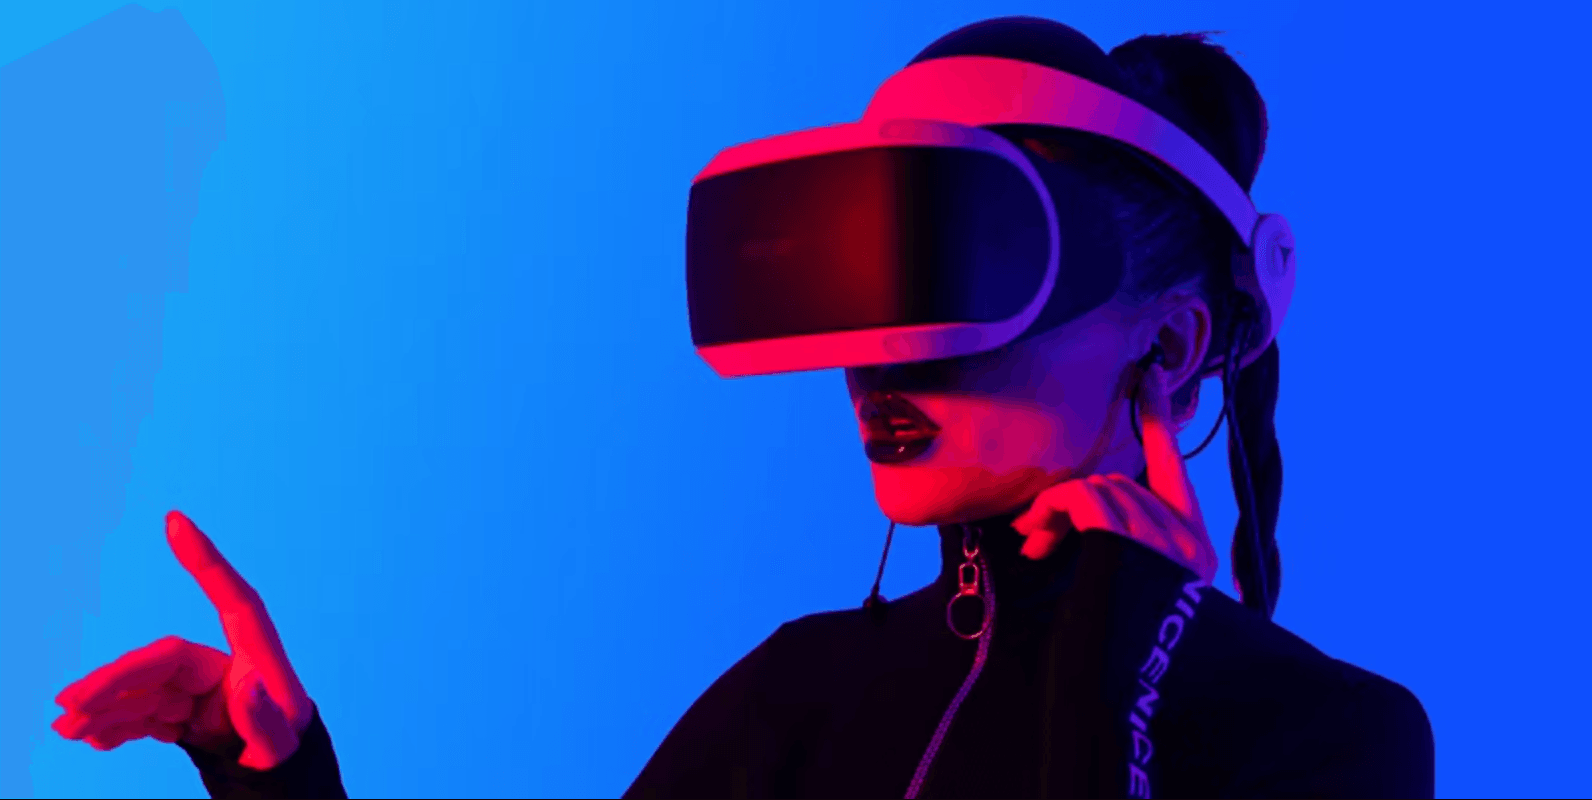 Woman with VR headset on